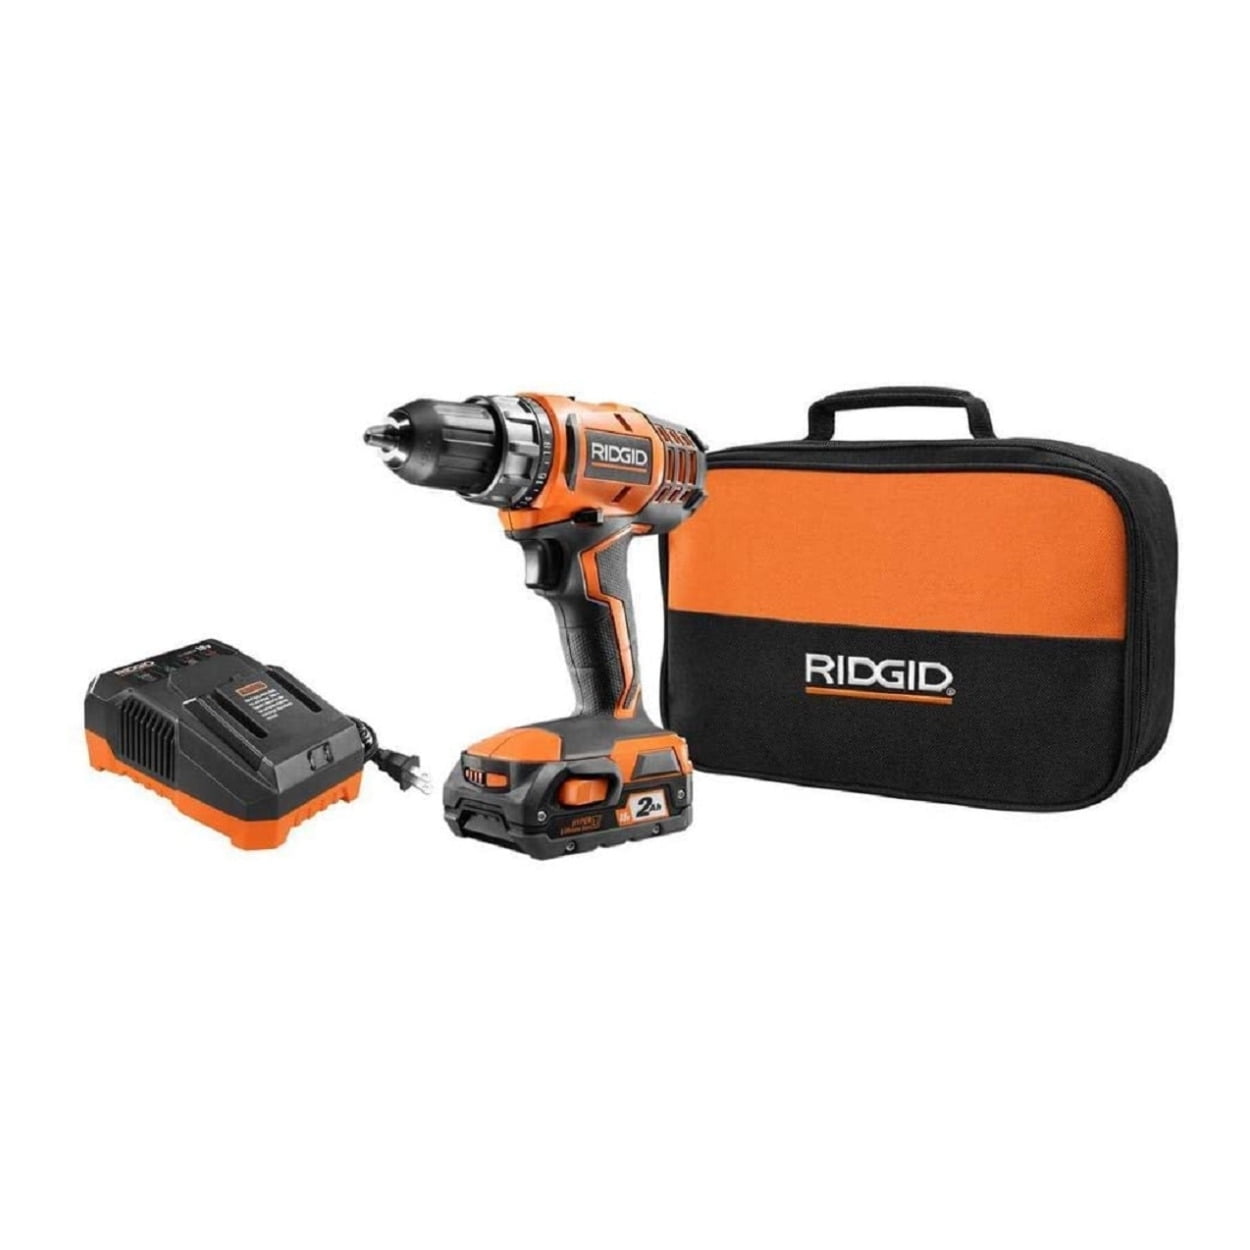 RIDGID 12-Volt Cordless Drill Kit 3/8 in 2-Speed LED light With Battery Charger 